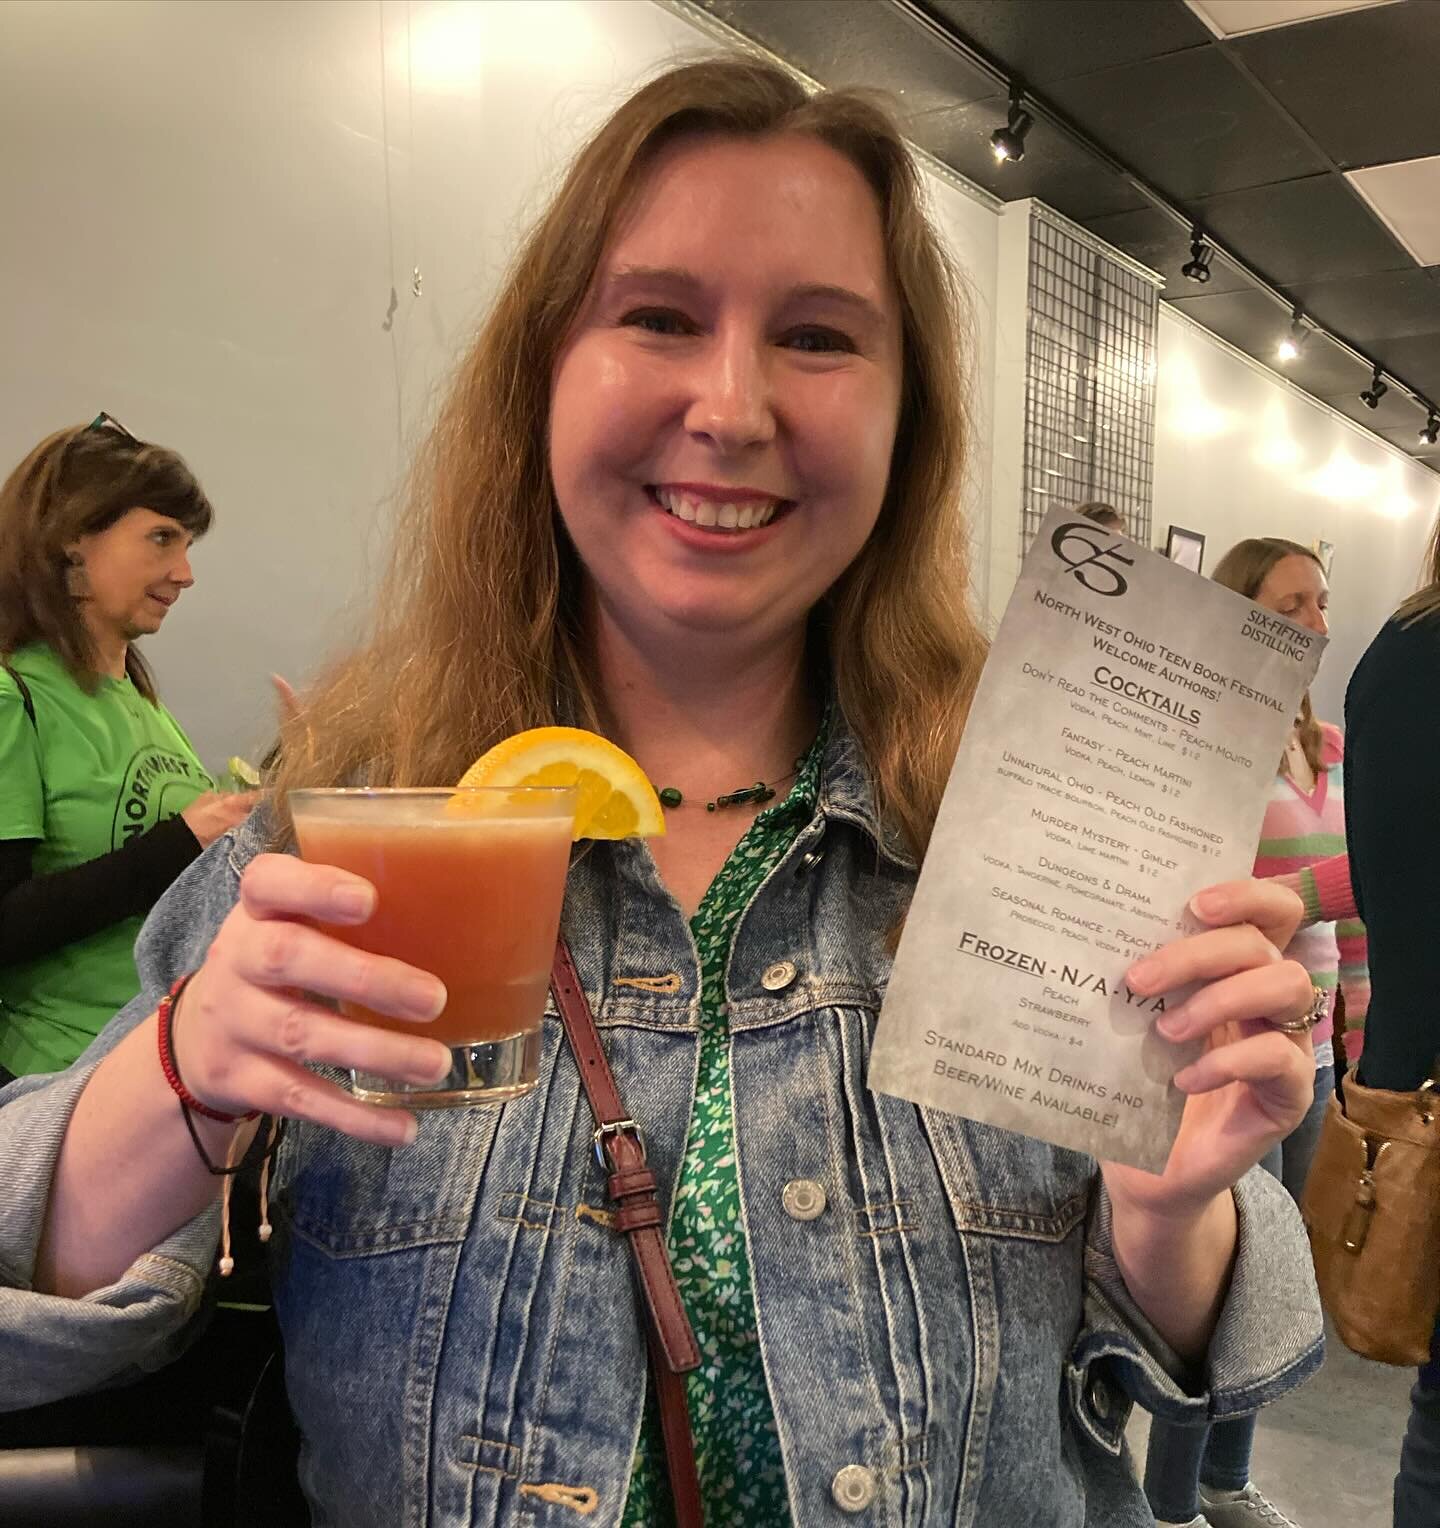 This was a fun way to kick off the Northwest Ohio Teen Book Festival&mdash;a drink named after Dungeons &amp; Drama! 😍 

My first time drinking absinthe too LOL 😳😉 

Can&rsquo;t wait to meet readers tomorrow!